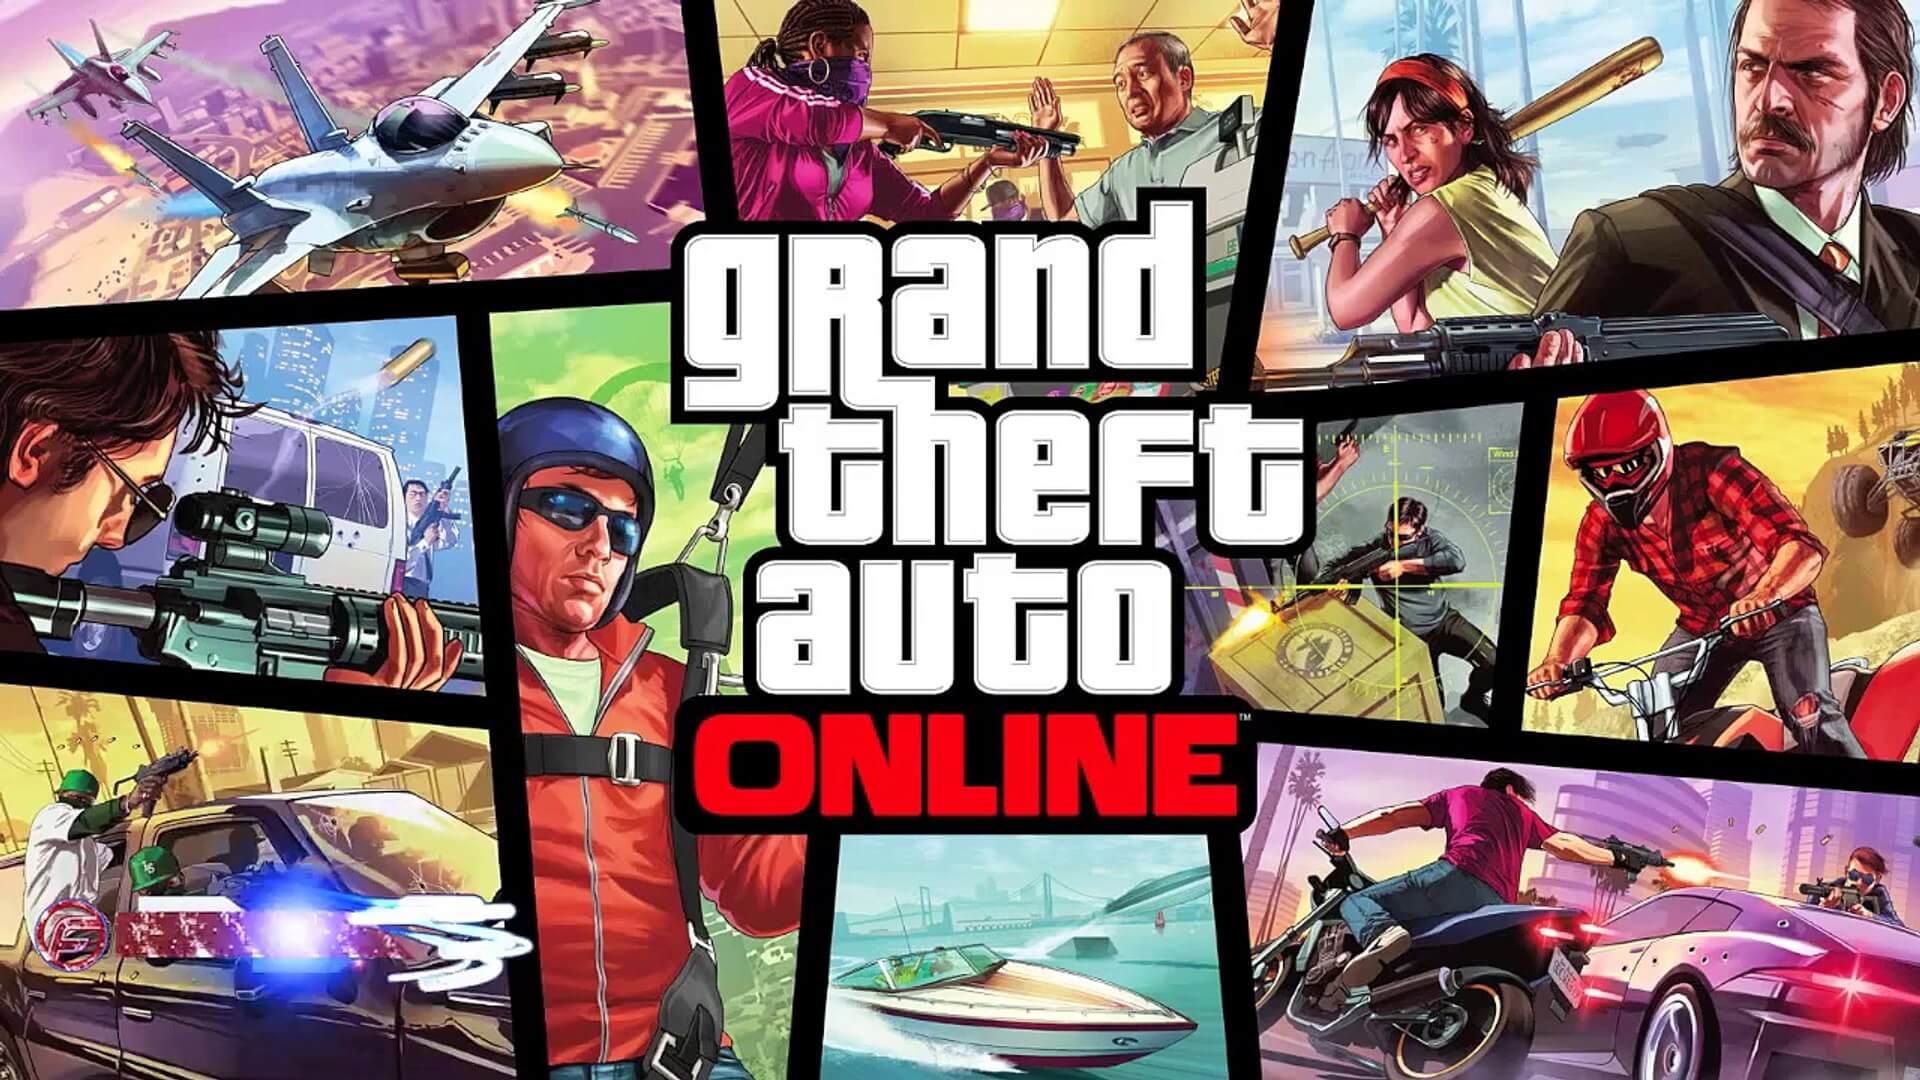 Grand Theft Auto 5 Online Free of Server Issues - IBTimes India